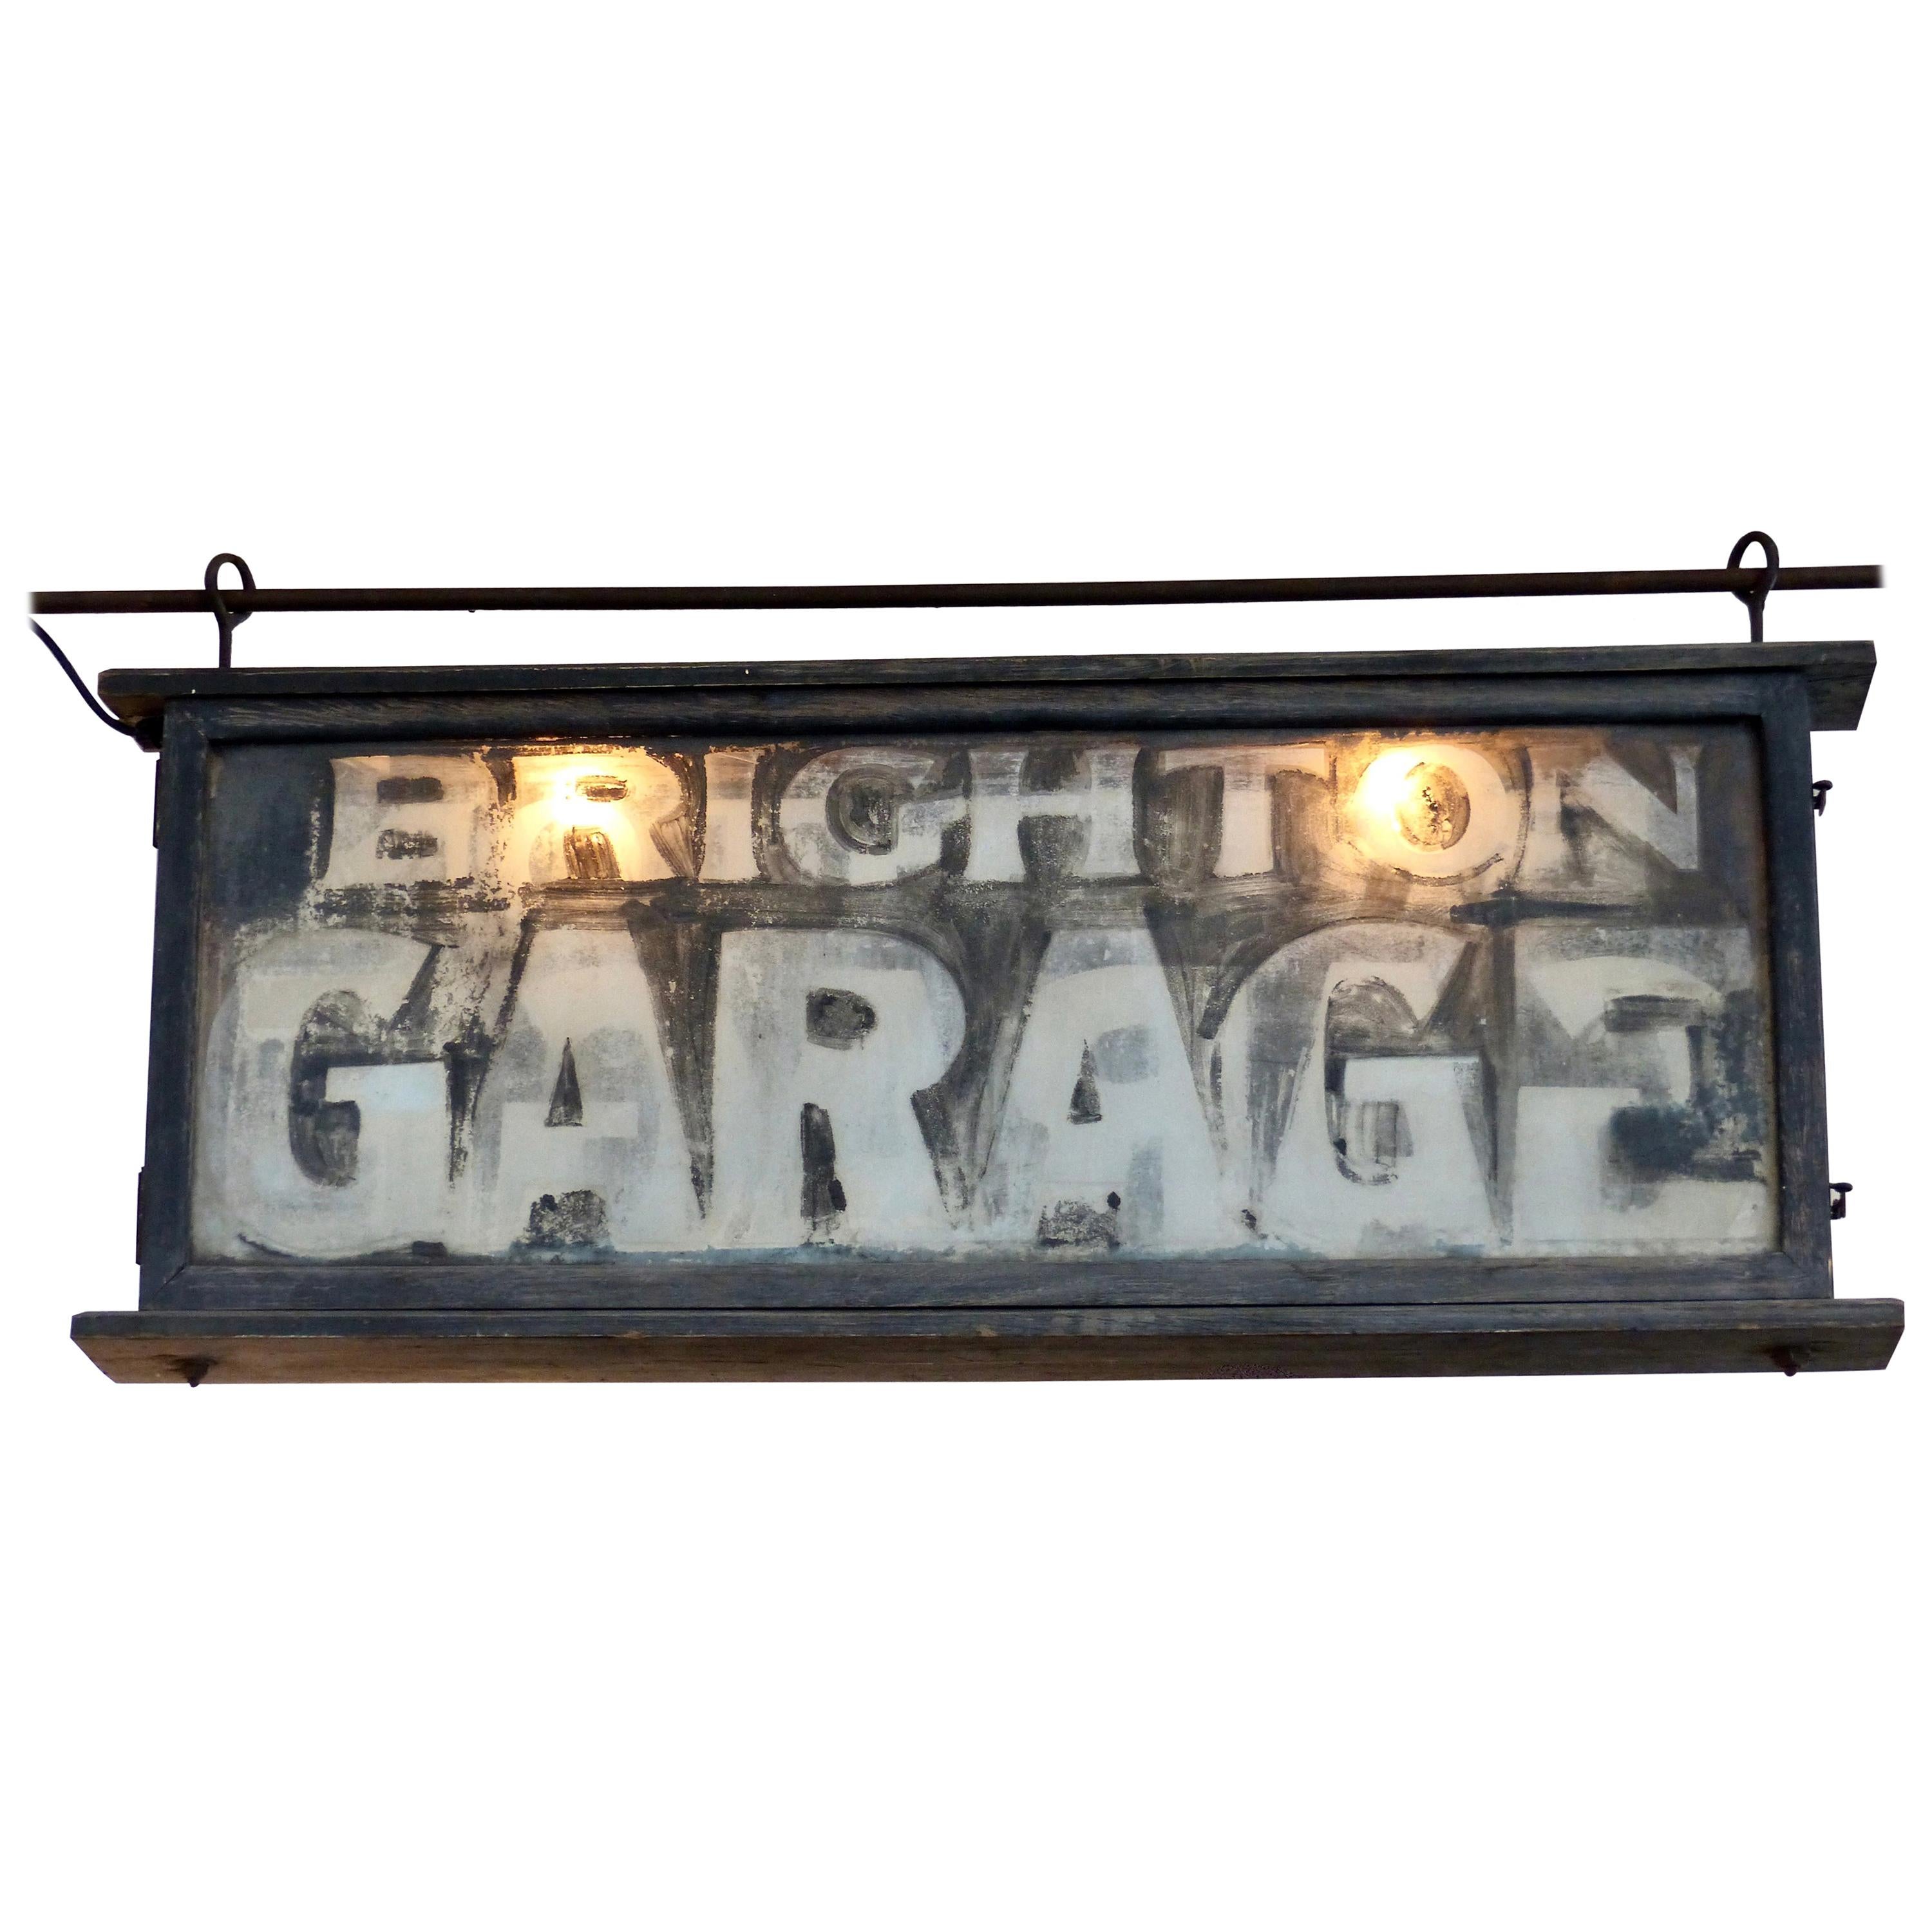 Wood Framed Glass Two-Sided Electric Sign, circa 1930